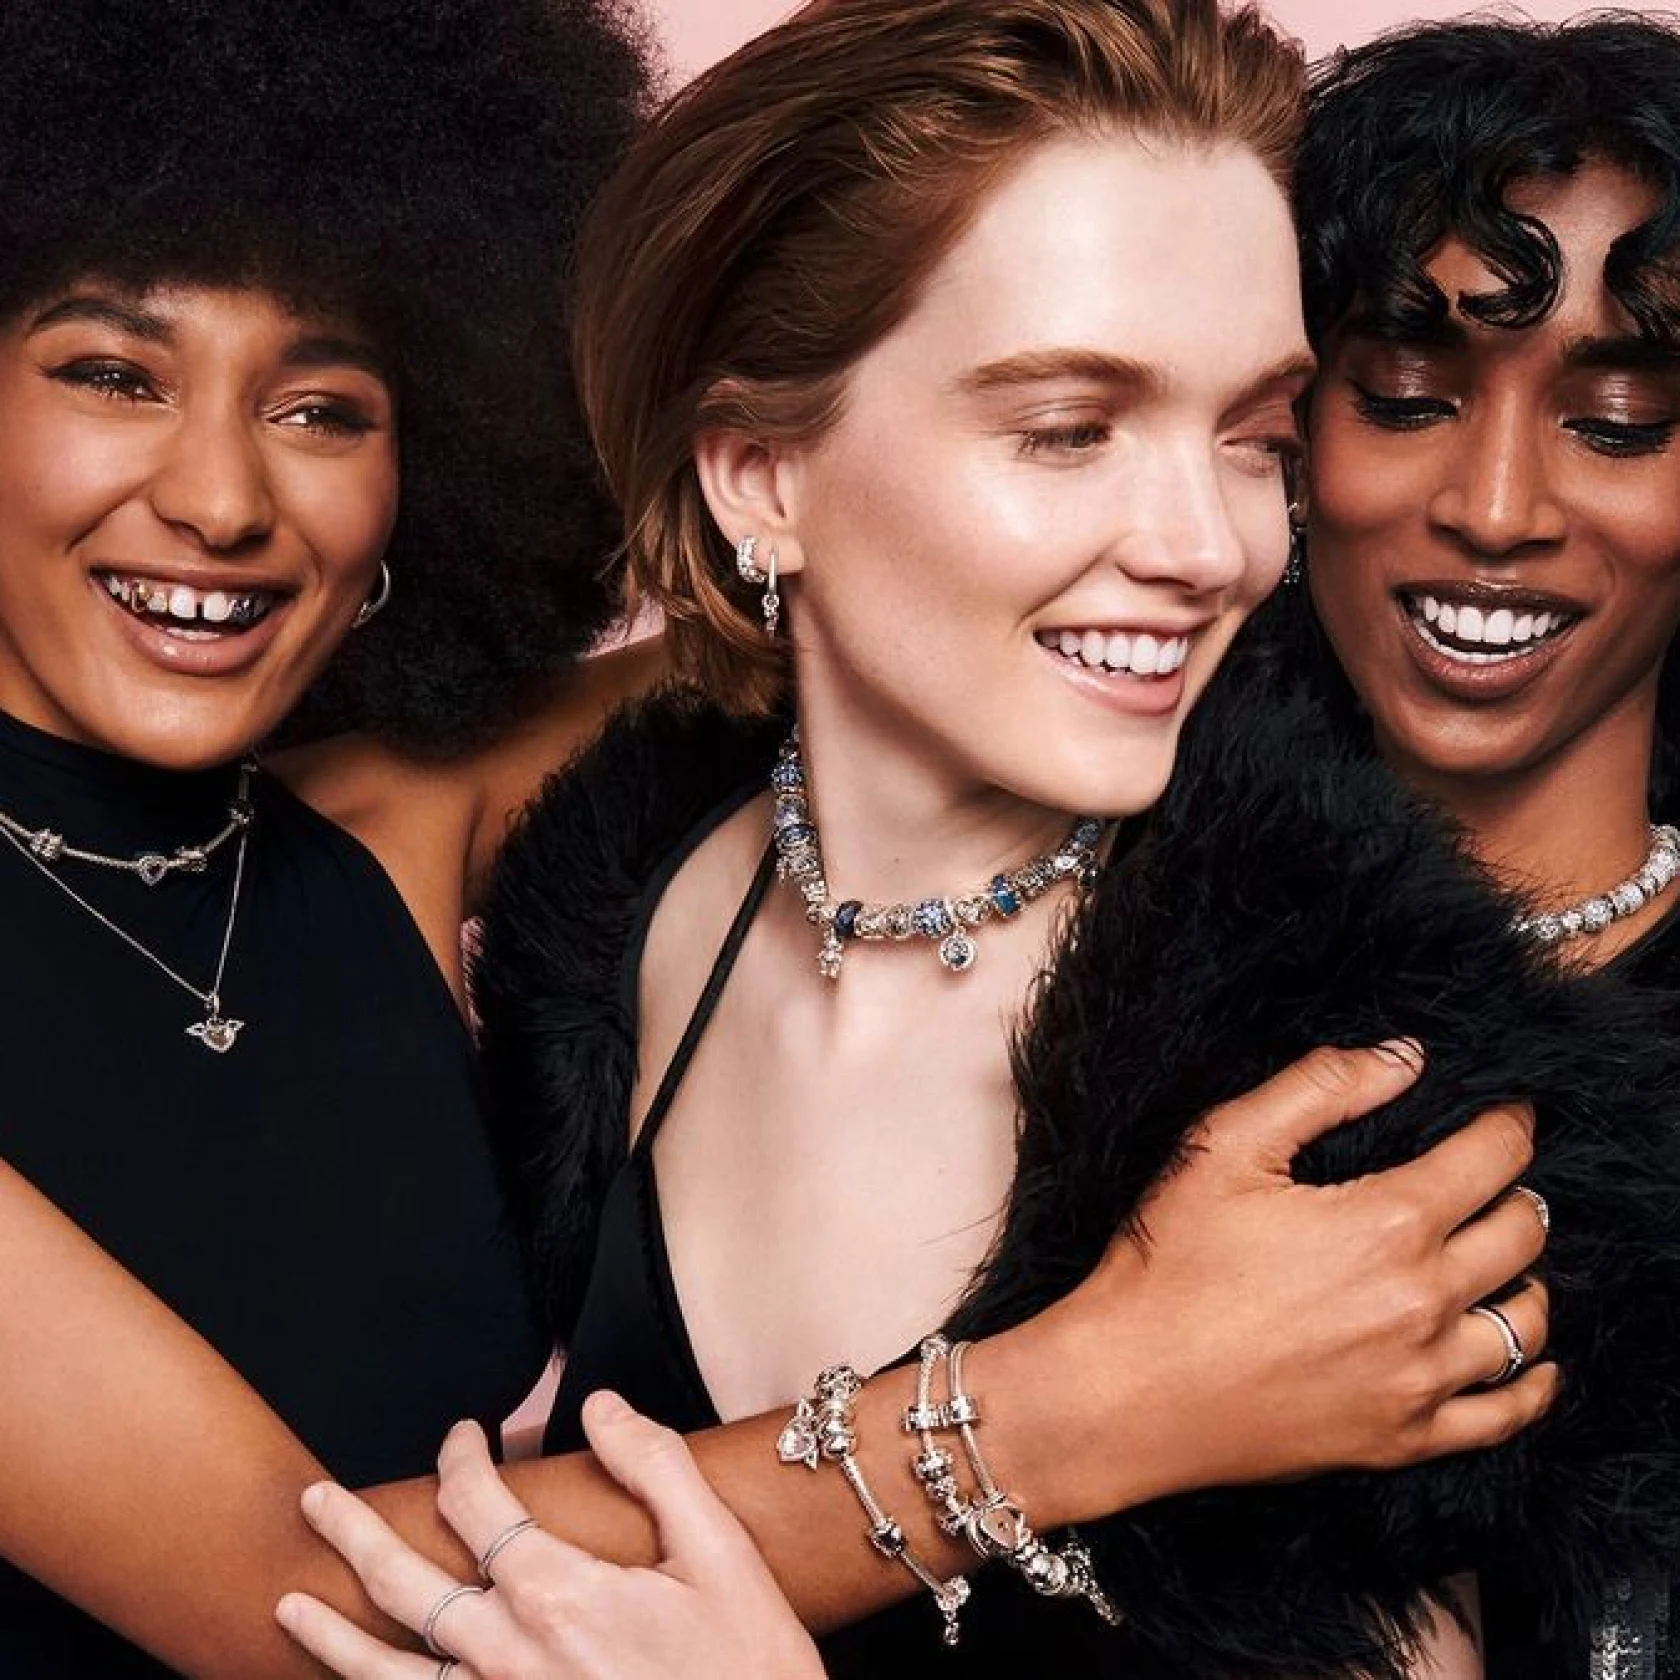 Three diverse young women hugging and smiling, wearing all black and decked out in silver bedazzled jewelry